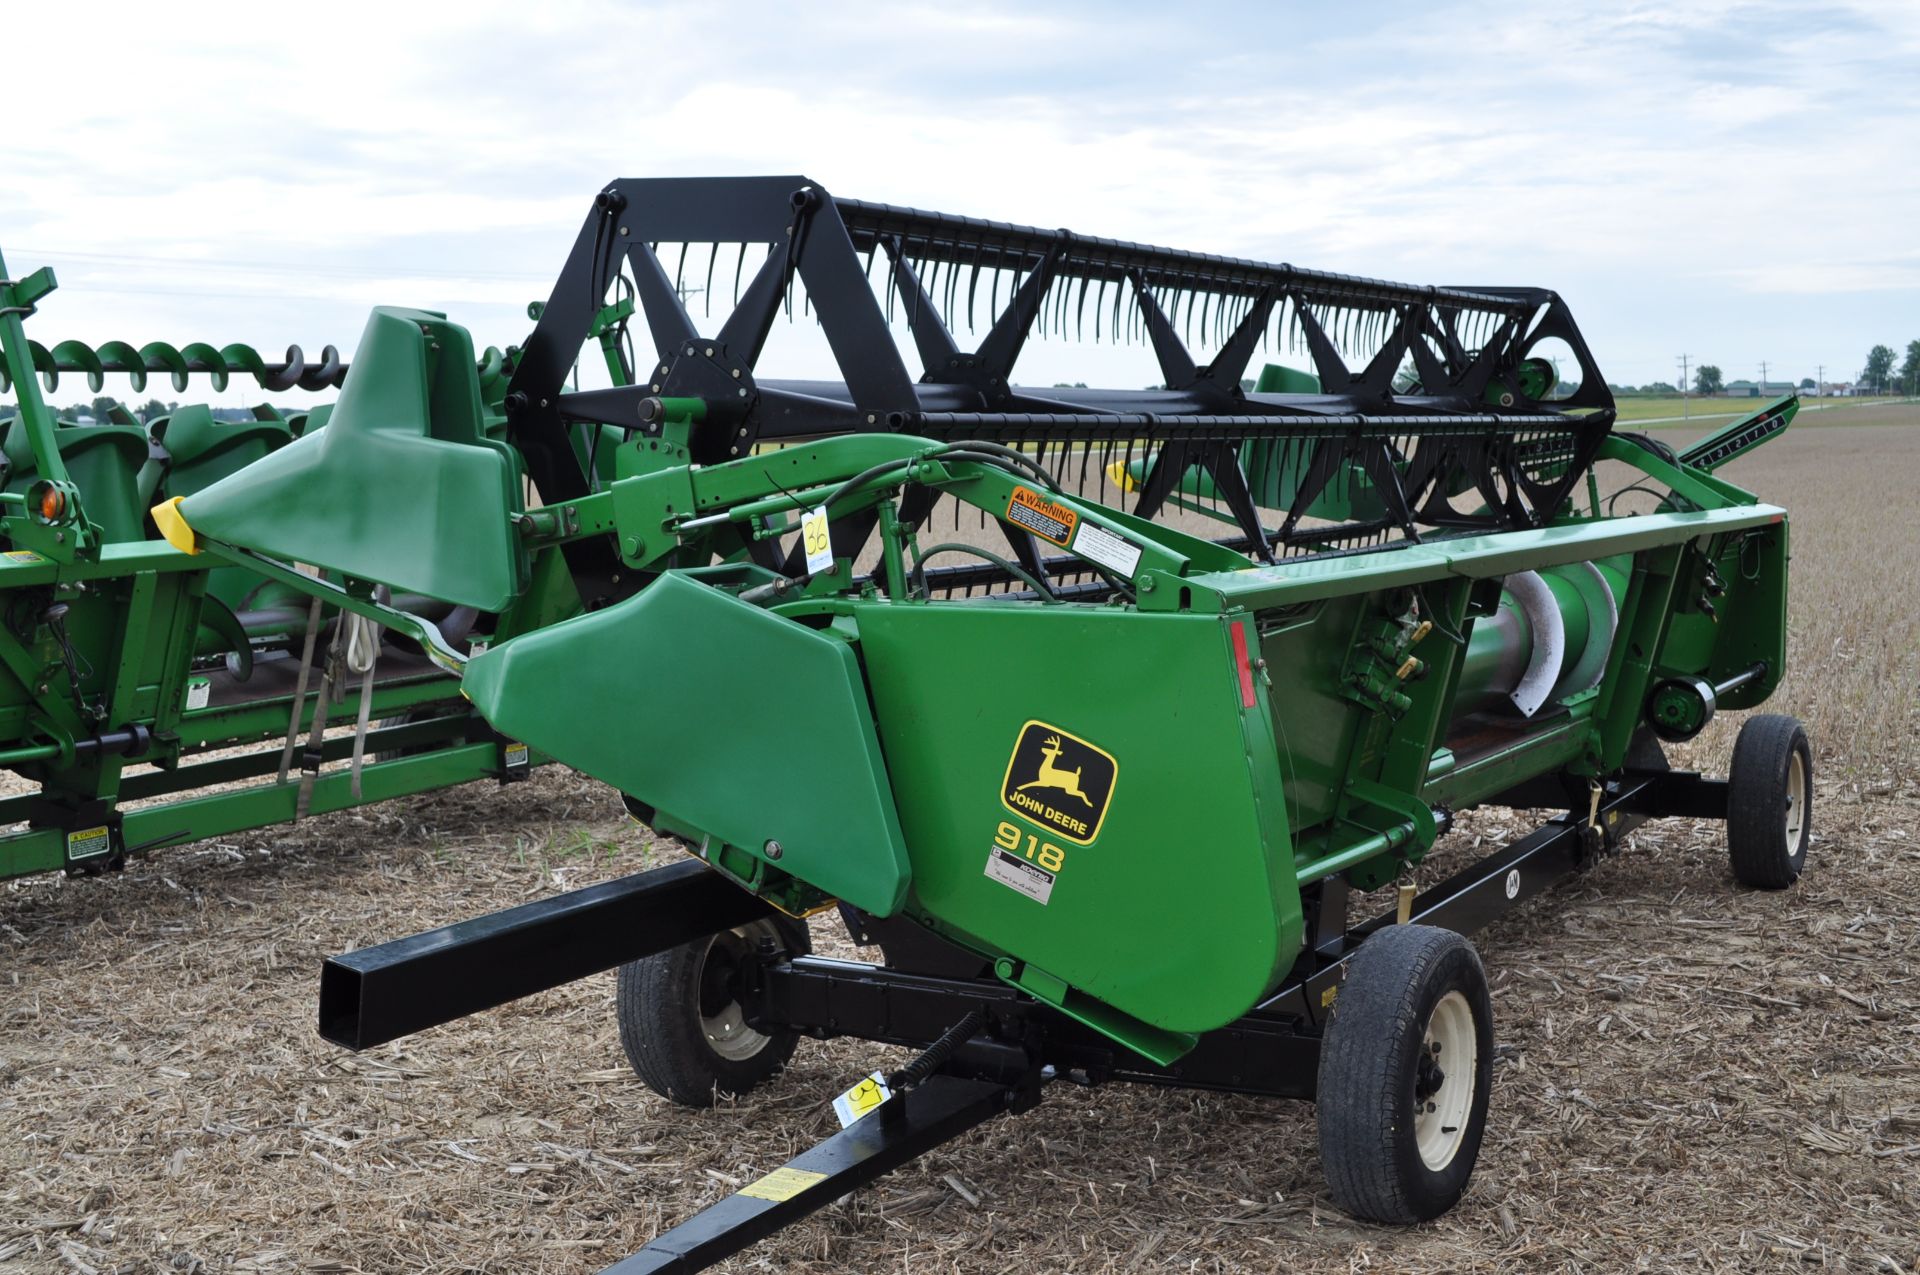 18’ John Deere 918 grain head, hyd fore/aft, row crop dividers, poly skid shoes, SN H00918F670831 - Image 2 of 10